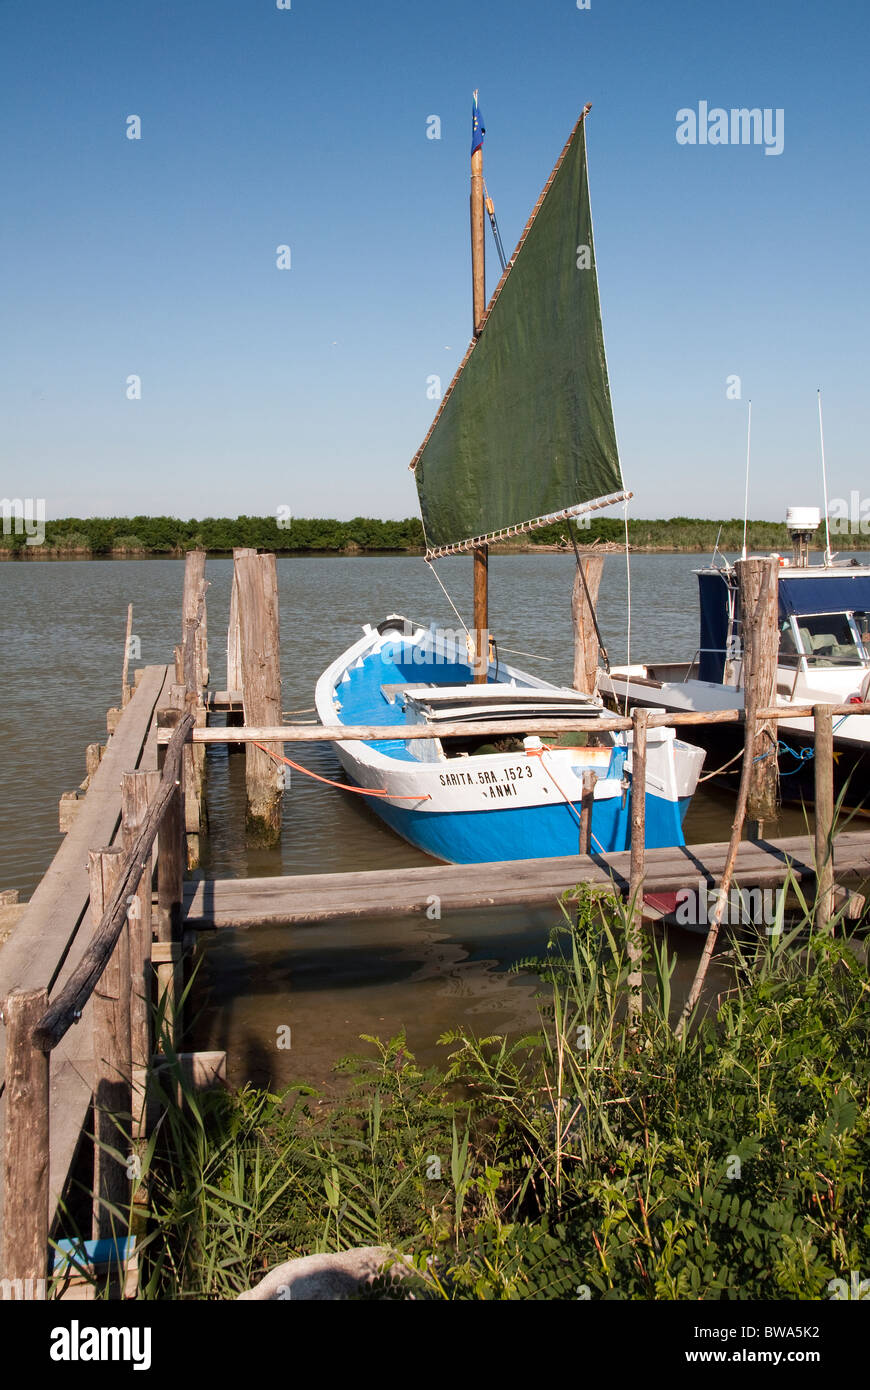 fishing boat with a traditional Gaff rig moored at Gorino, in the